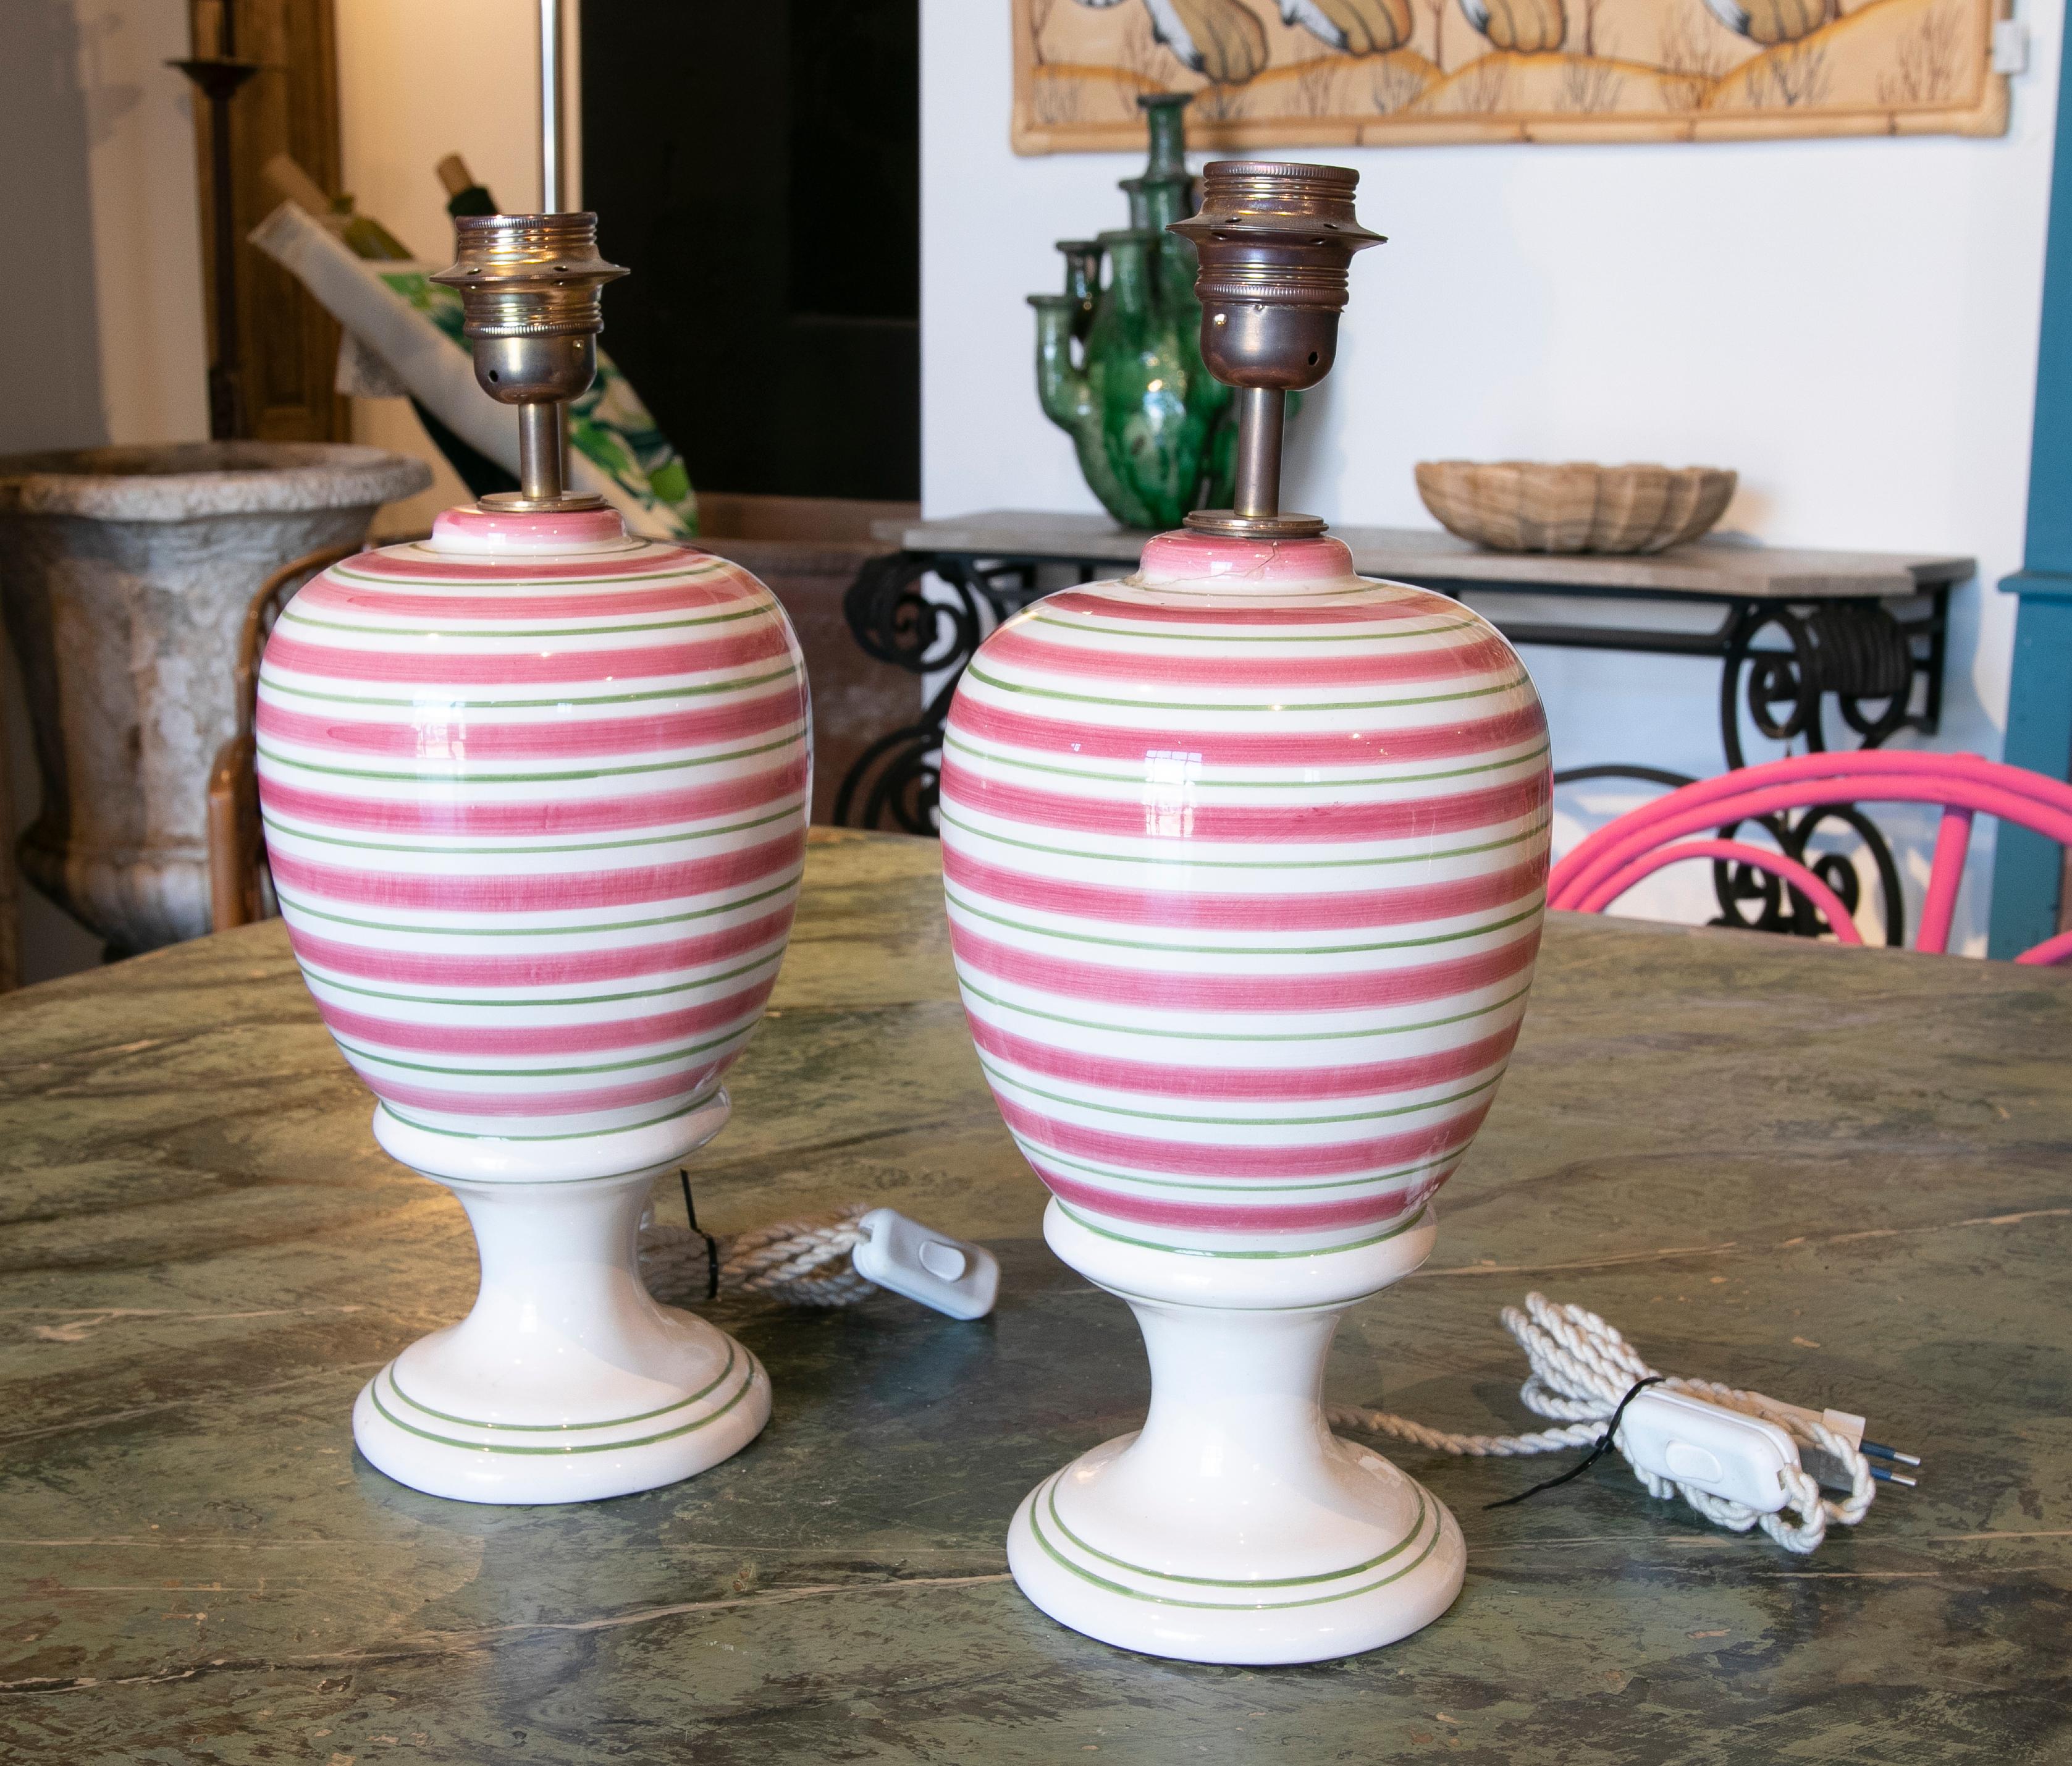 Pair of white ceramic table lamps with handpainted red and green stripes.